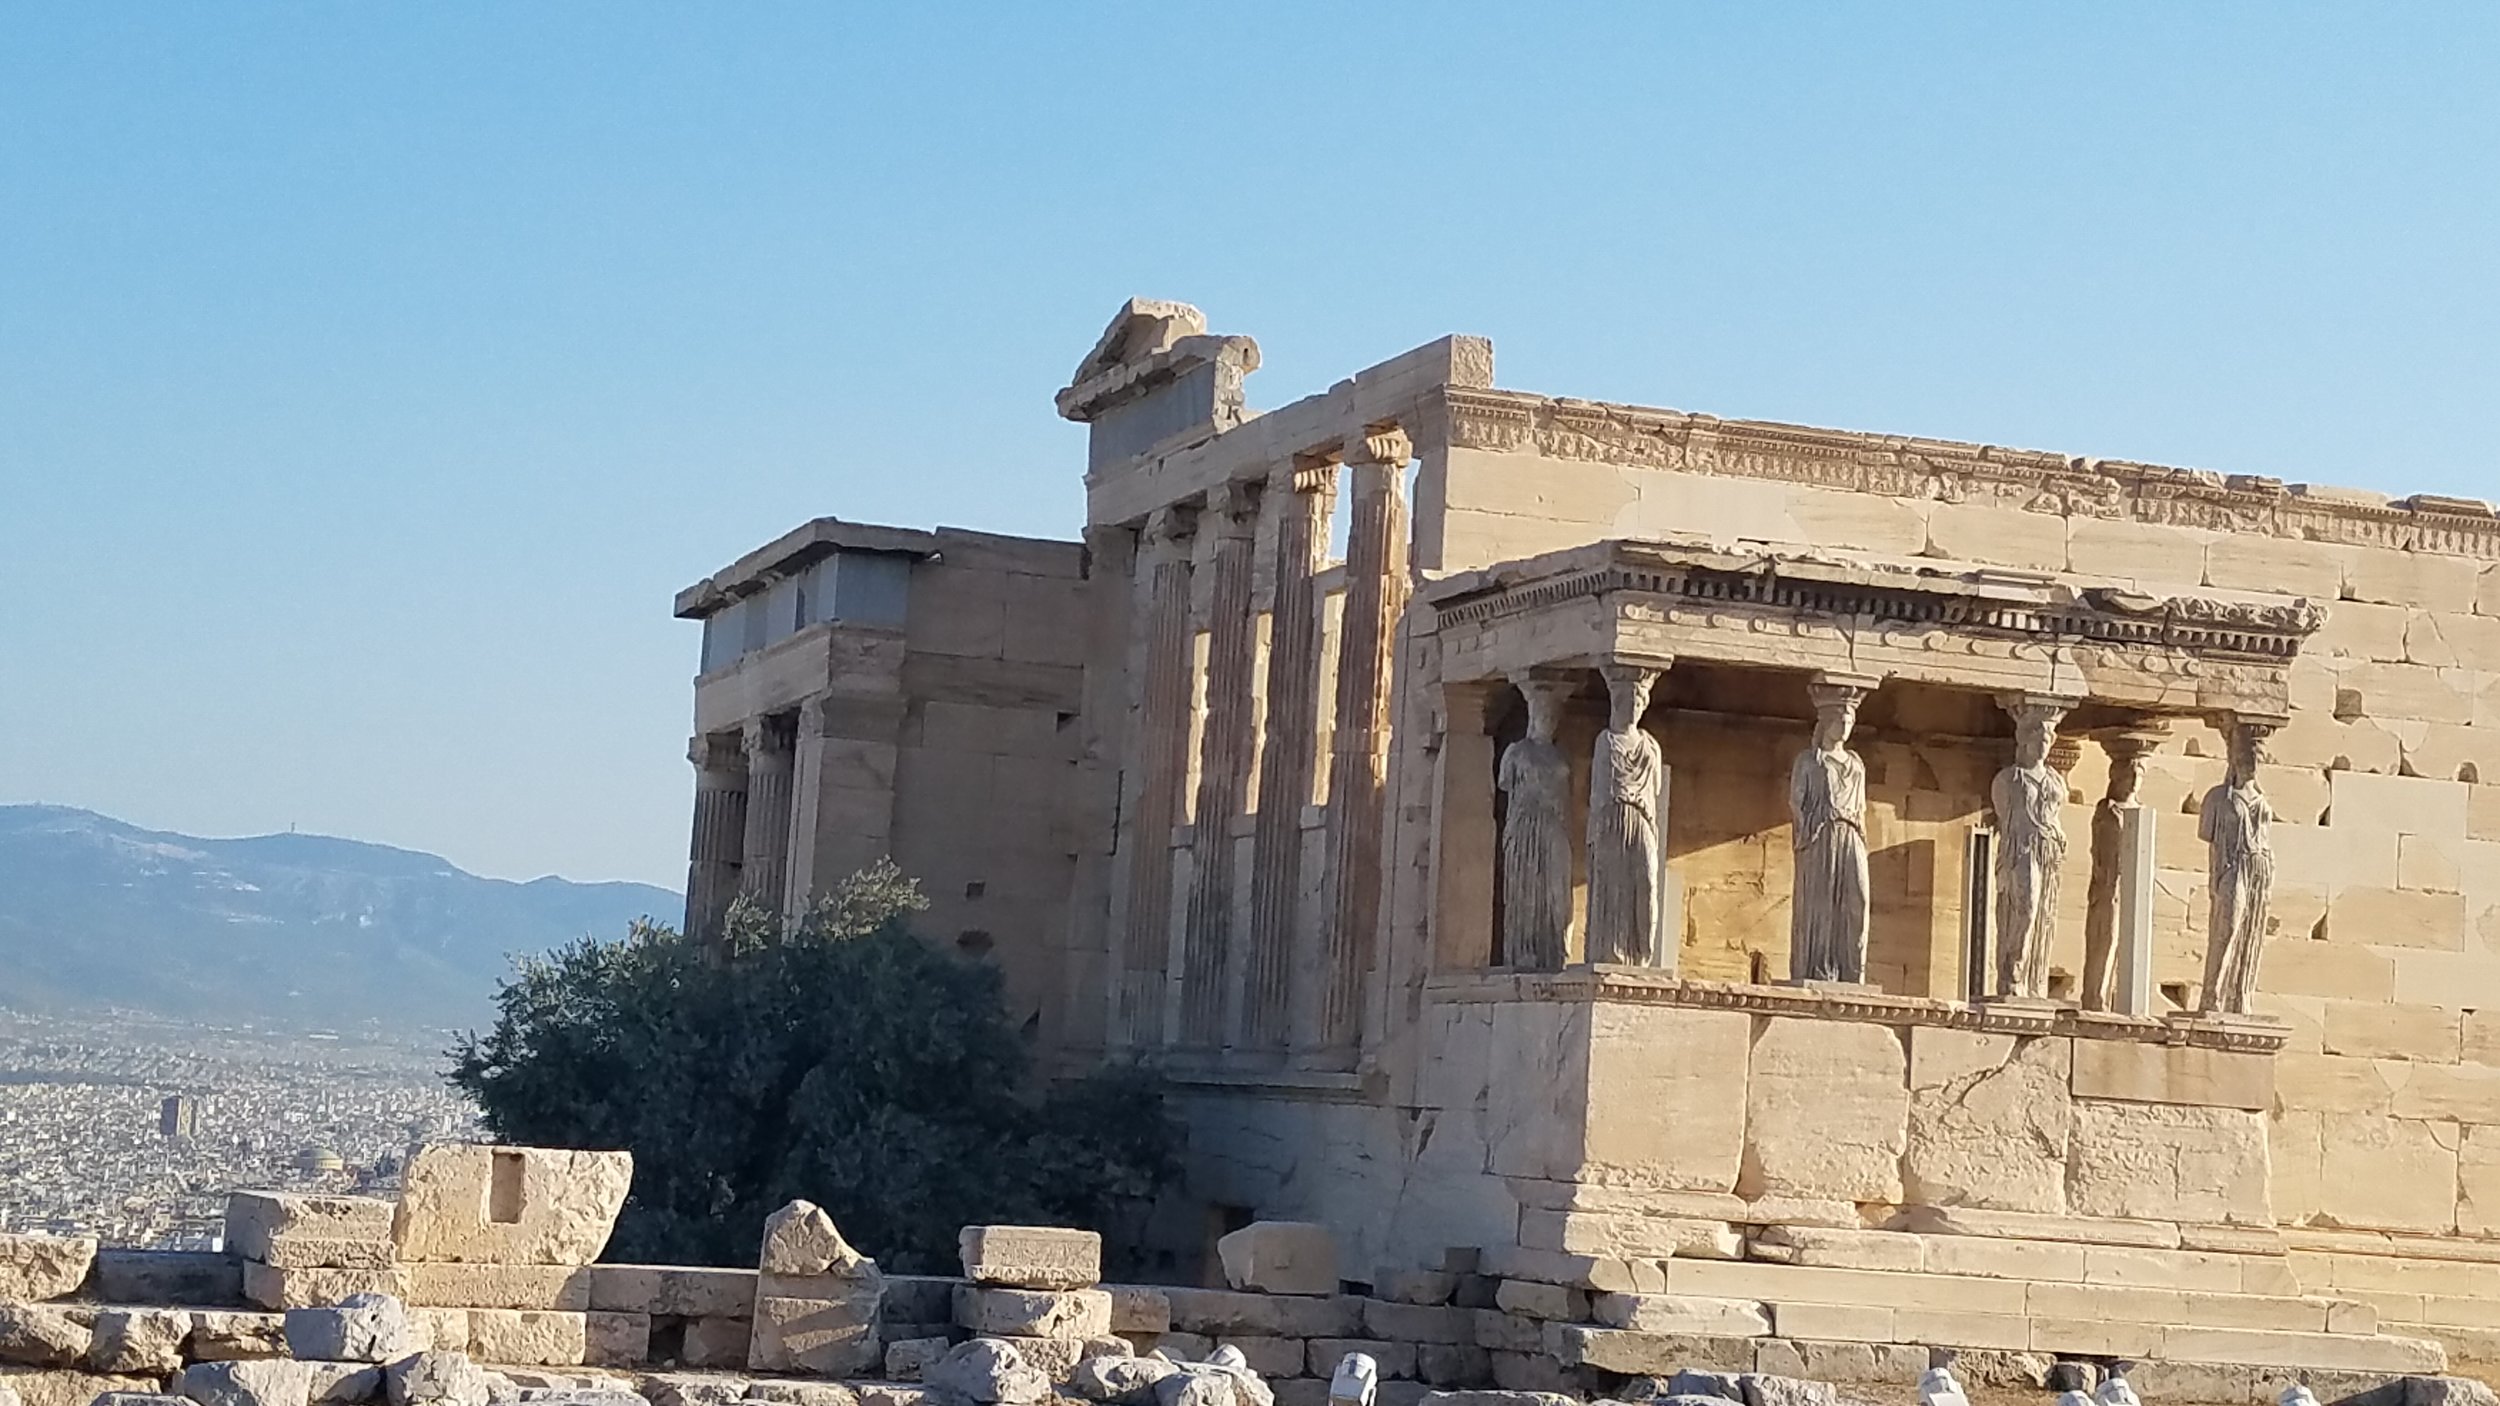  One of the structures on the Acropolis 